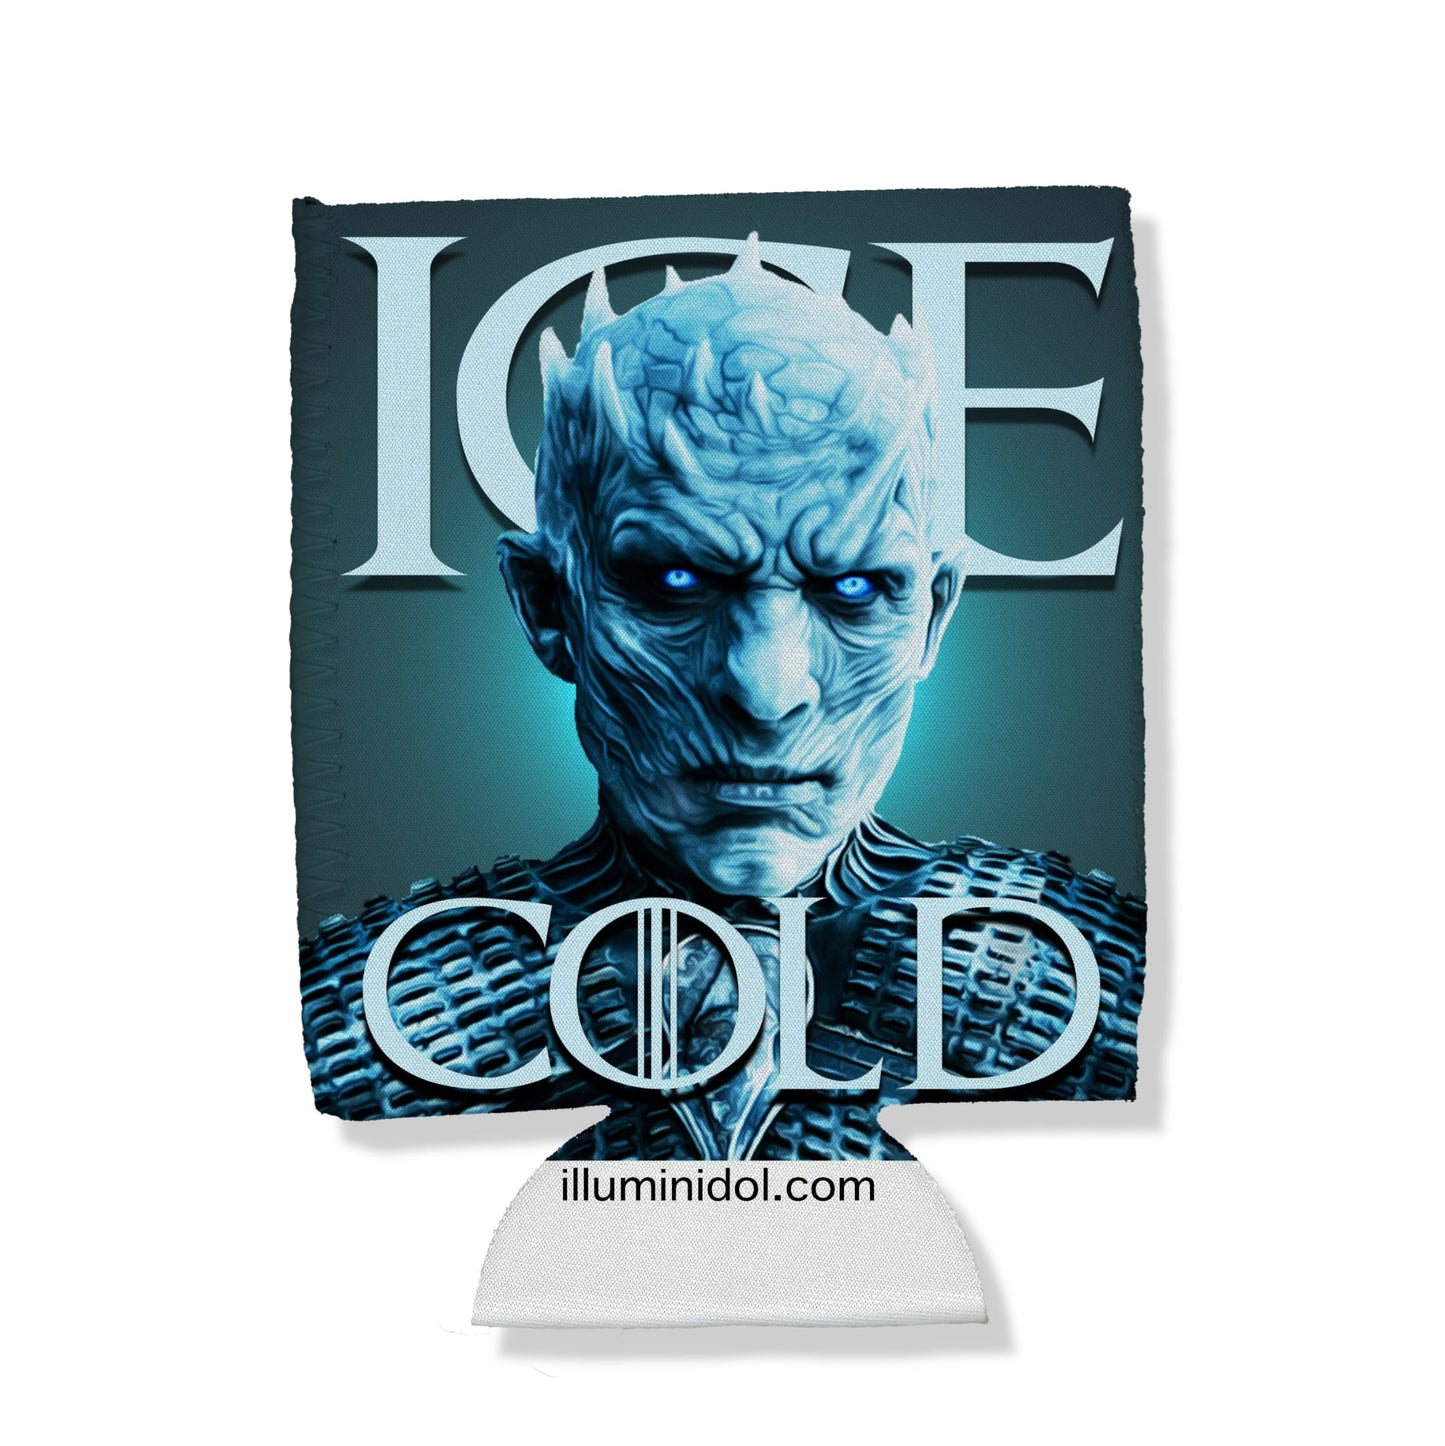 Night King (Game of Thrones) "Ice Cold" Can Hugger